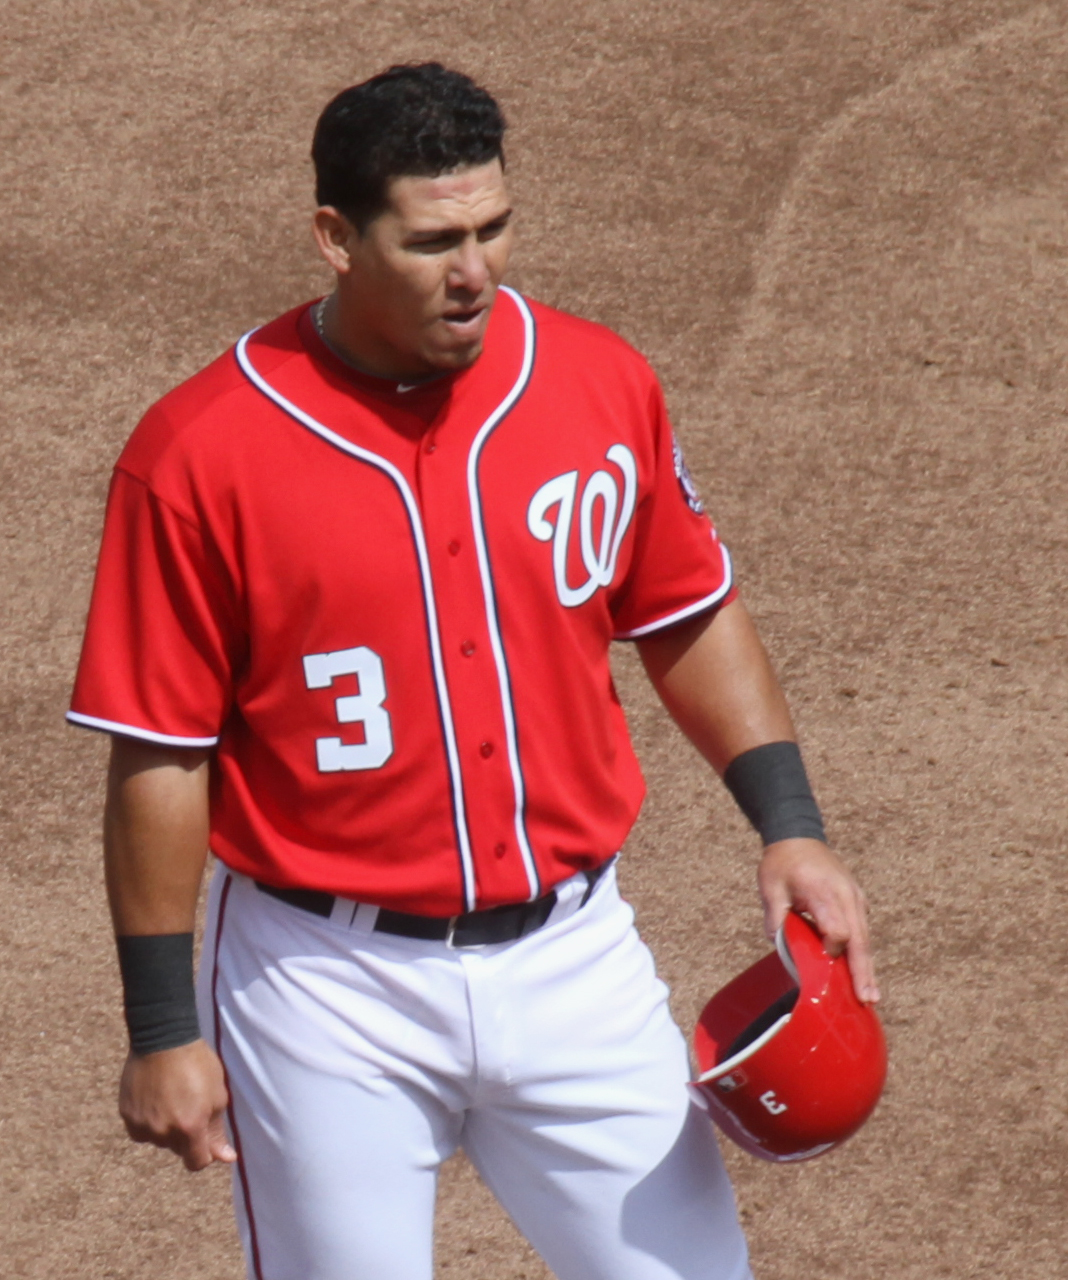 a baseball player holding a red helmet and glove